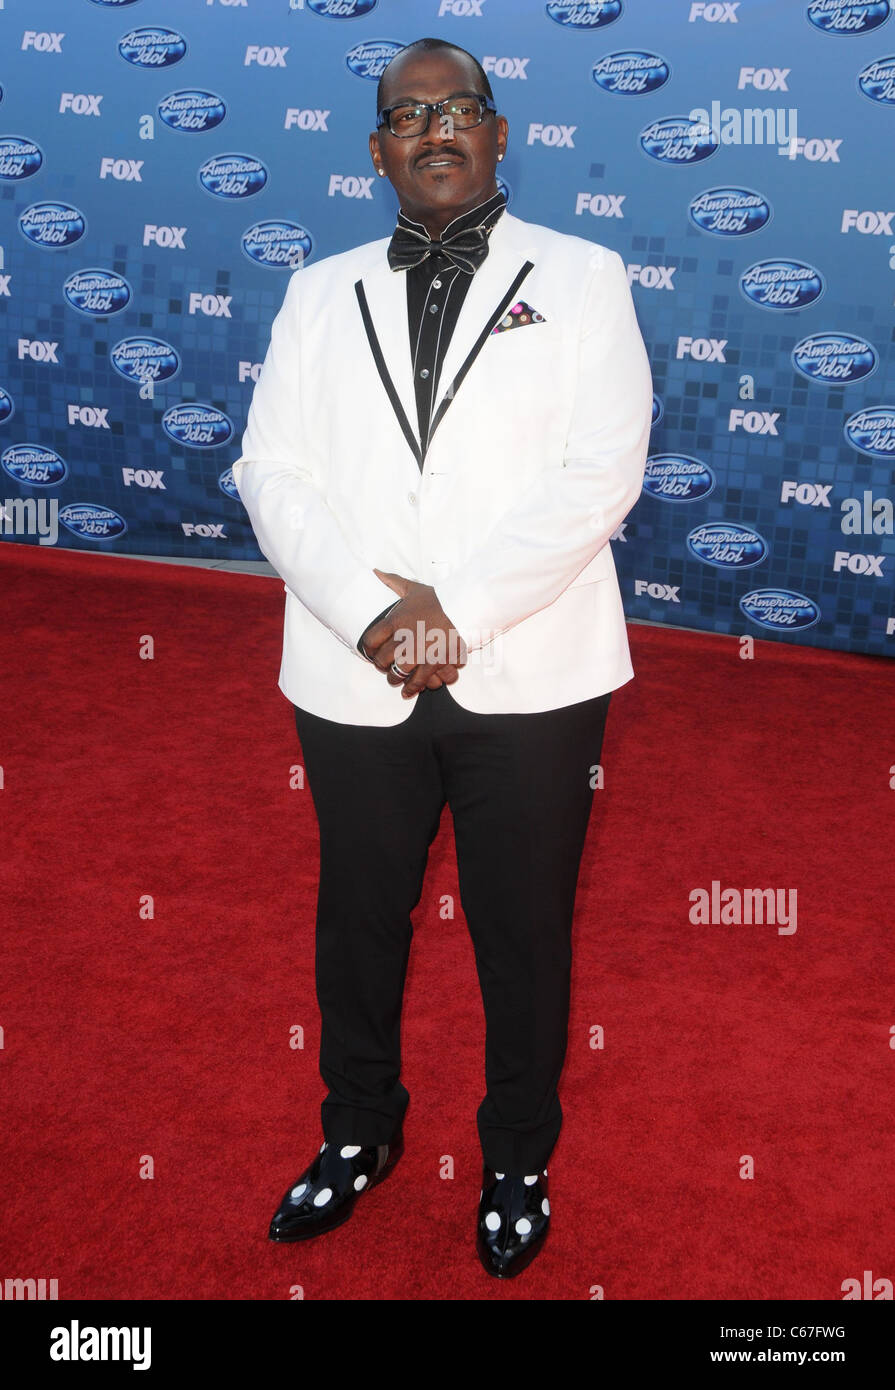 Randy Jackson at arrivals for AMERICAN IDOL Grand Finale 2011, Nokia Theatre L.A. LIVE, Los Angeles, CA May 25, 2011. Photo By: Stock Photo